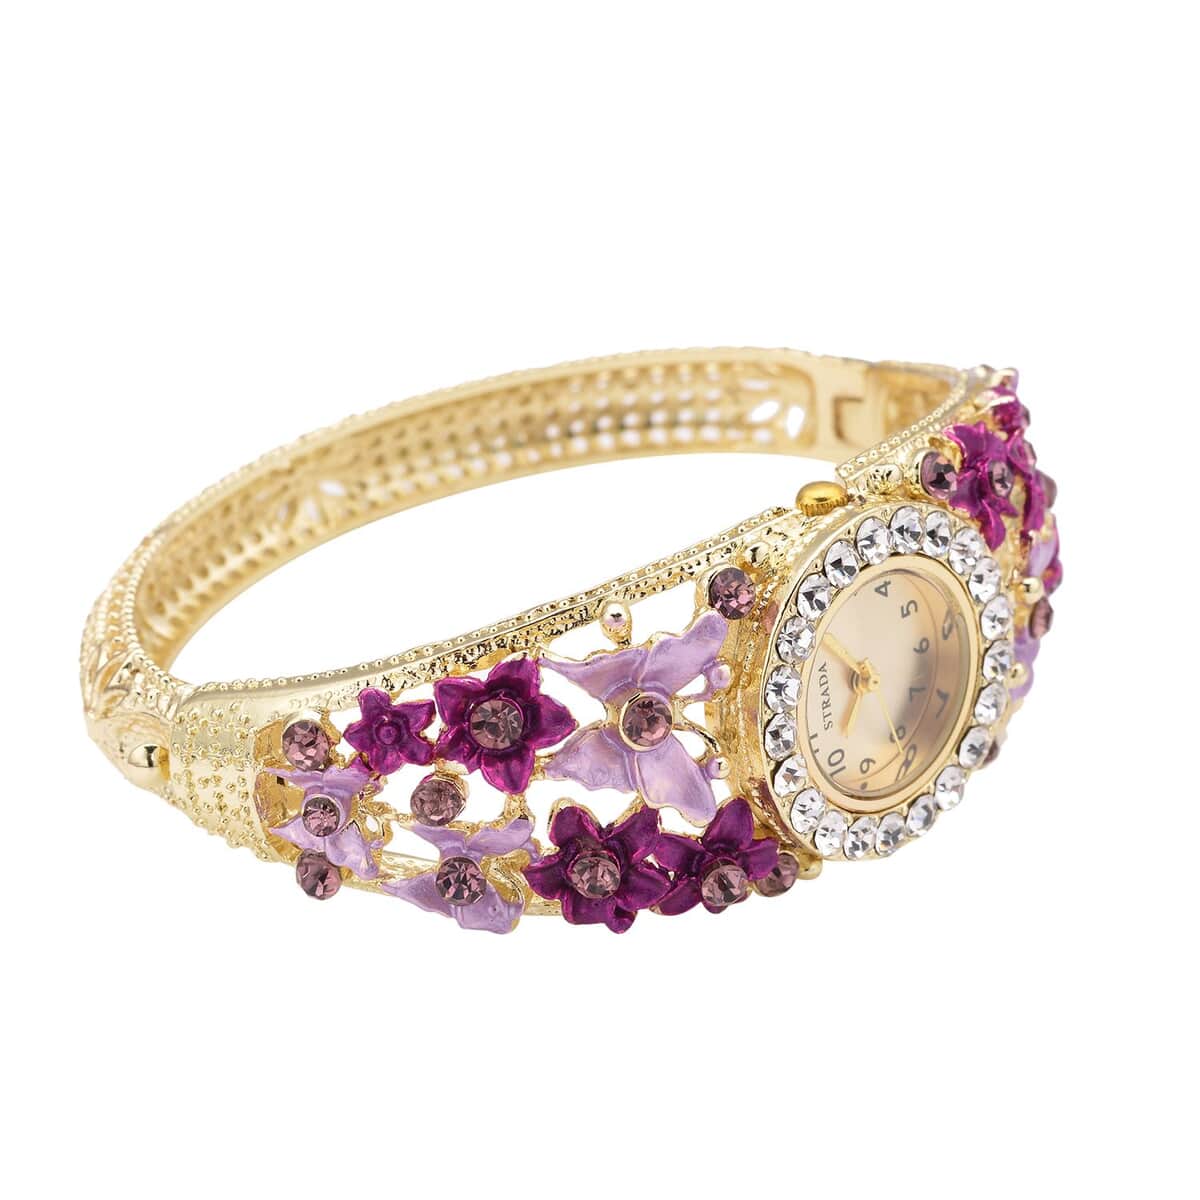 Strada Japanese Movement Purple and White Crystal Floral & Butterfly Pattern Bangle Bracelet (6.5-7 In) Watch in Goldtone (24.65mm) image number 4